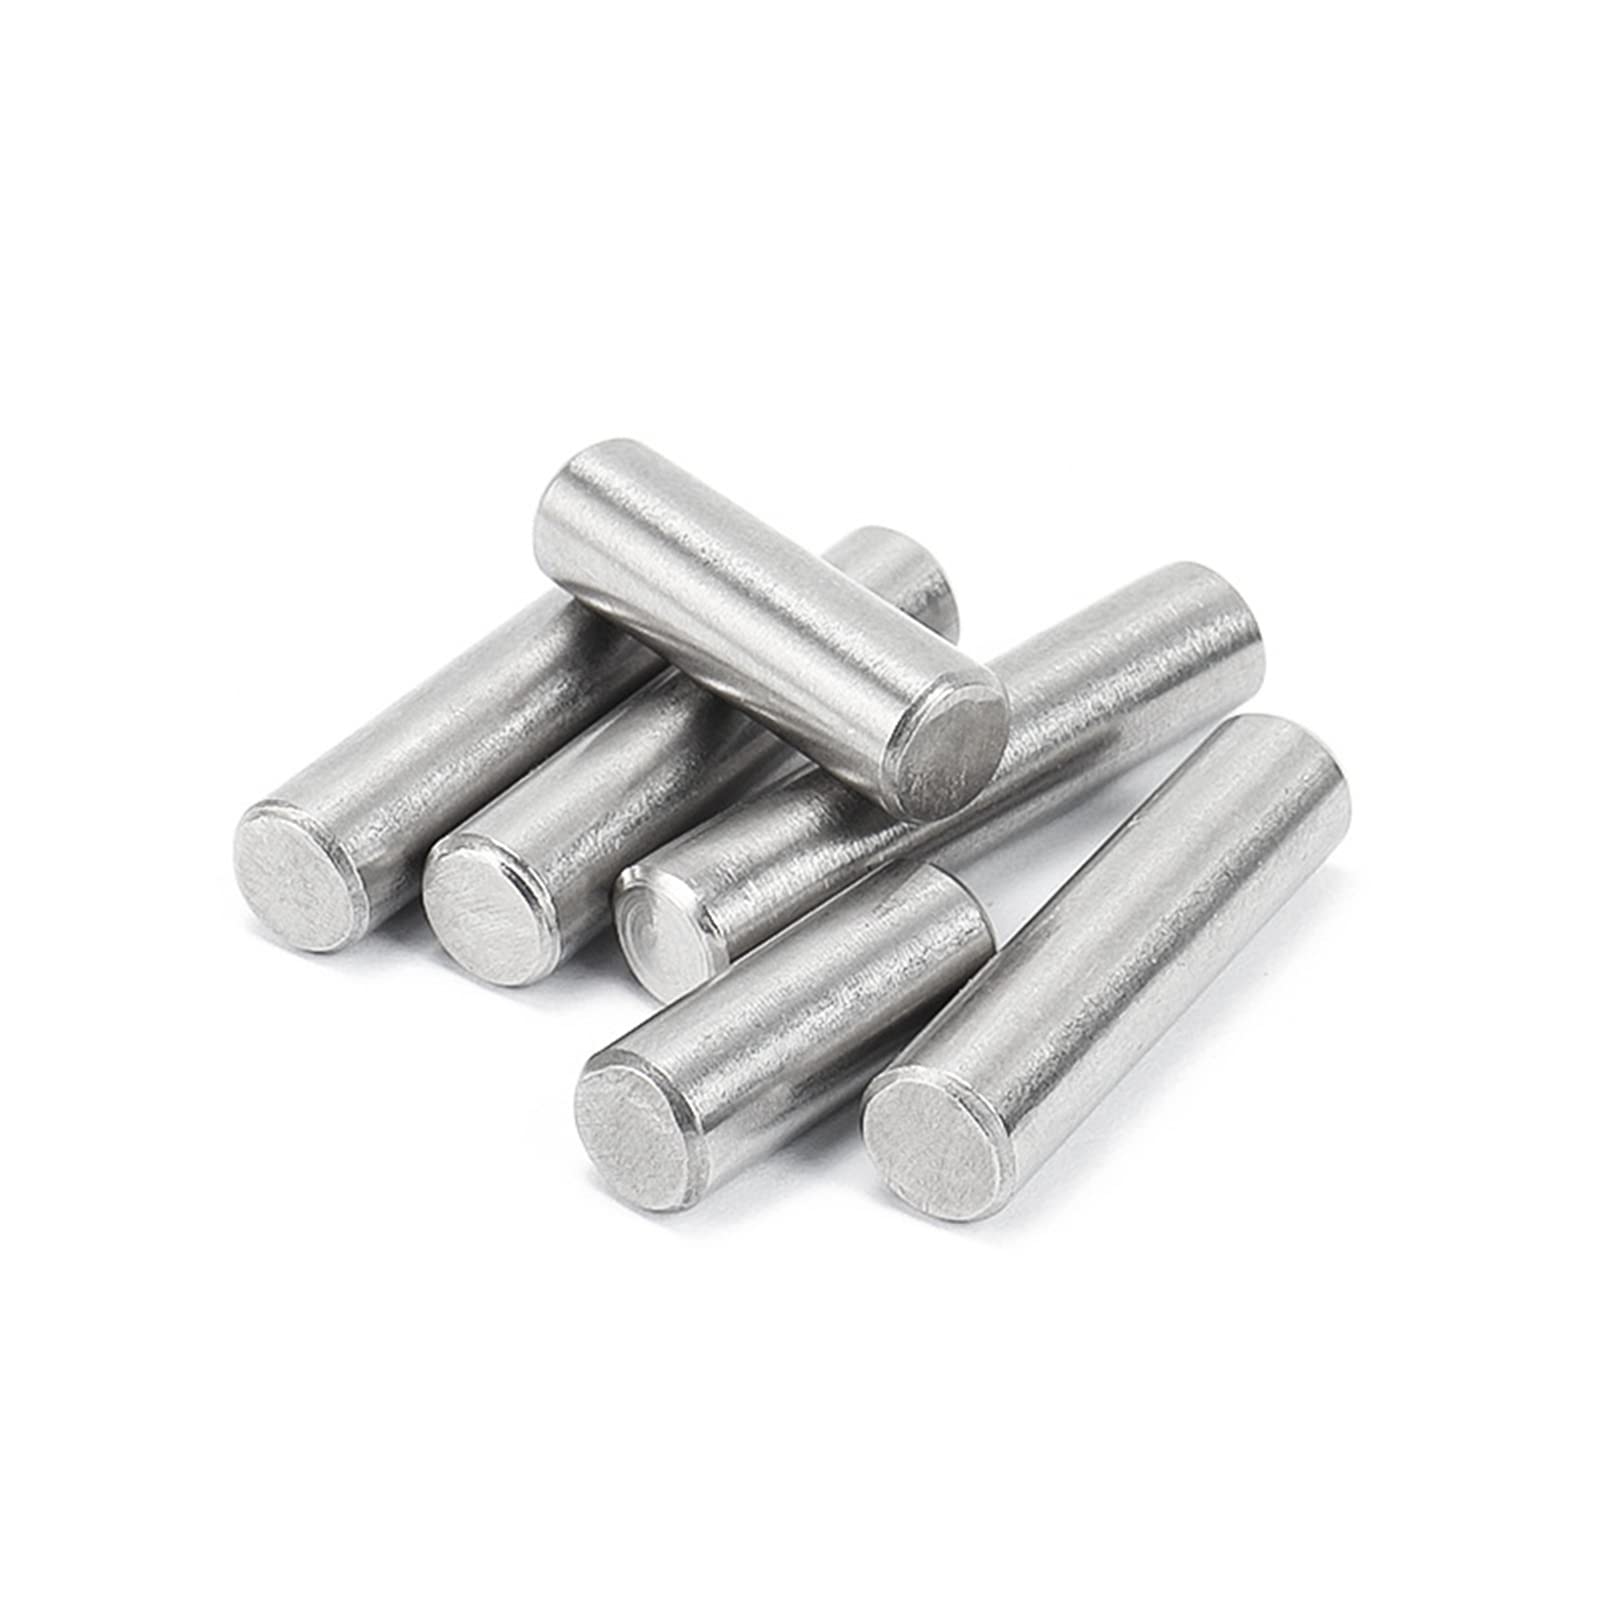 Boxonly M8x40mm Dowel Pins 304 Stainless Steel Cylindrical Pin Pegs Support Shelves Fasten Elements GB119 Fixed Pin Shaft